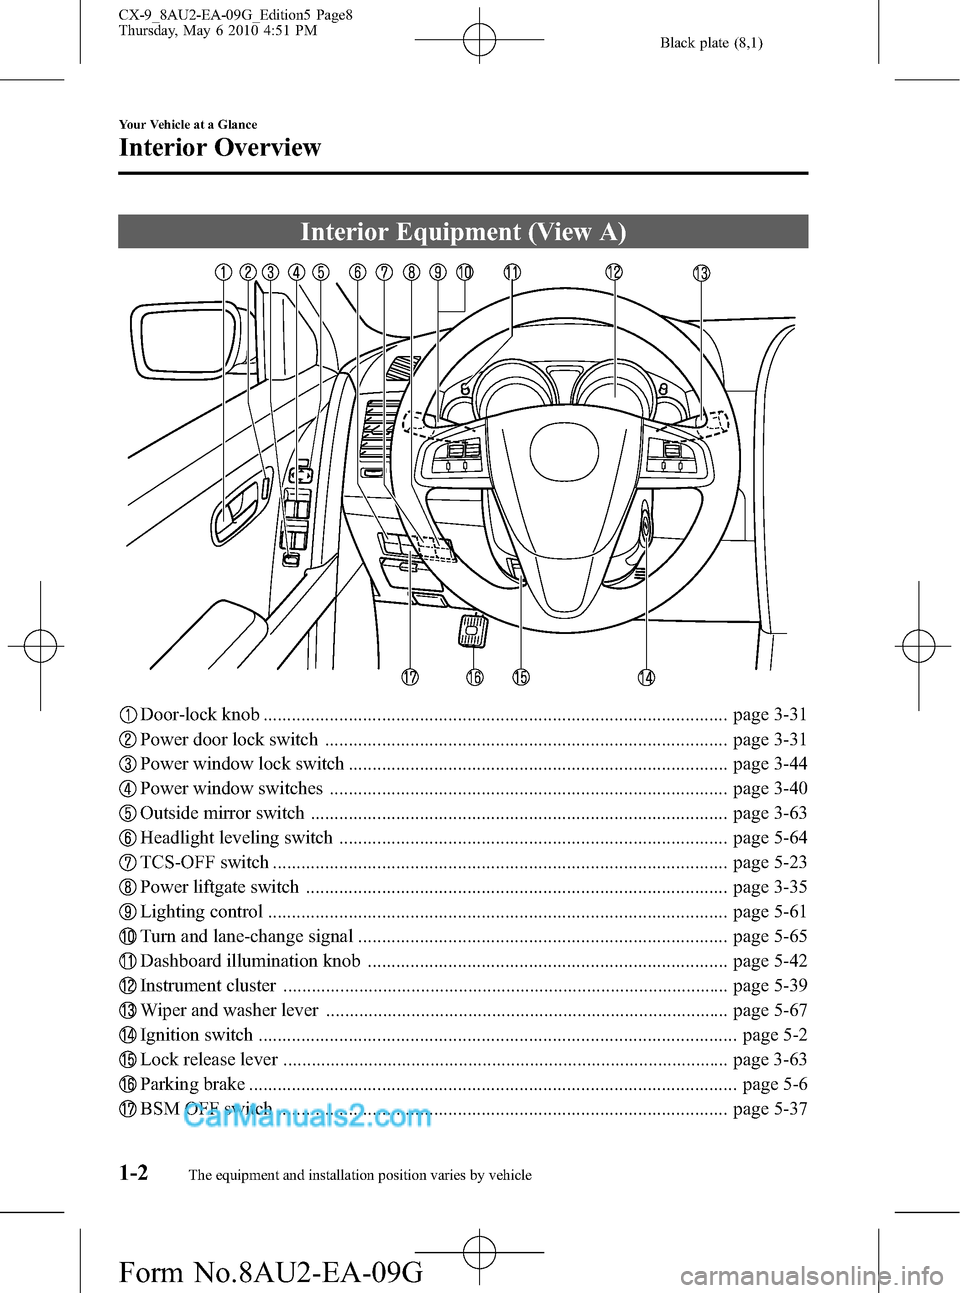 MAZDA MODEL CX-9 2010  Owners Manual (in English) Black plate (8,1)
Interior Equipment (View A)
Door-lock knob .................................................................................................. page 3-31
Power door lock switch .......